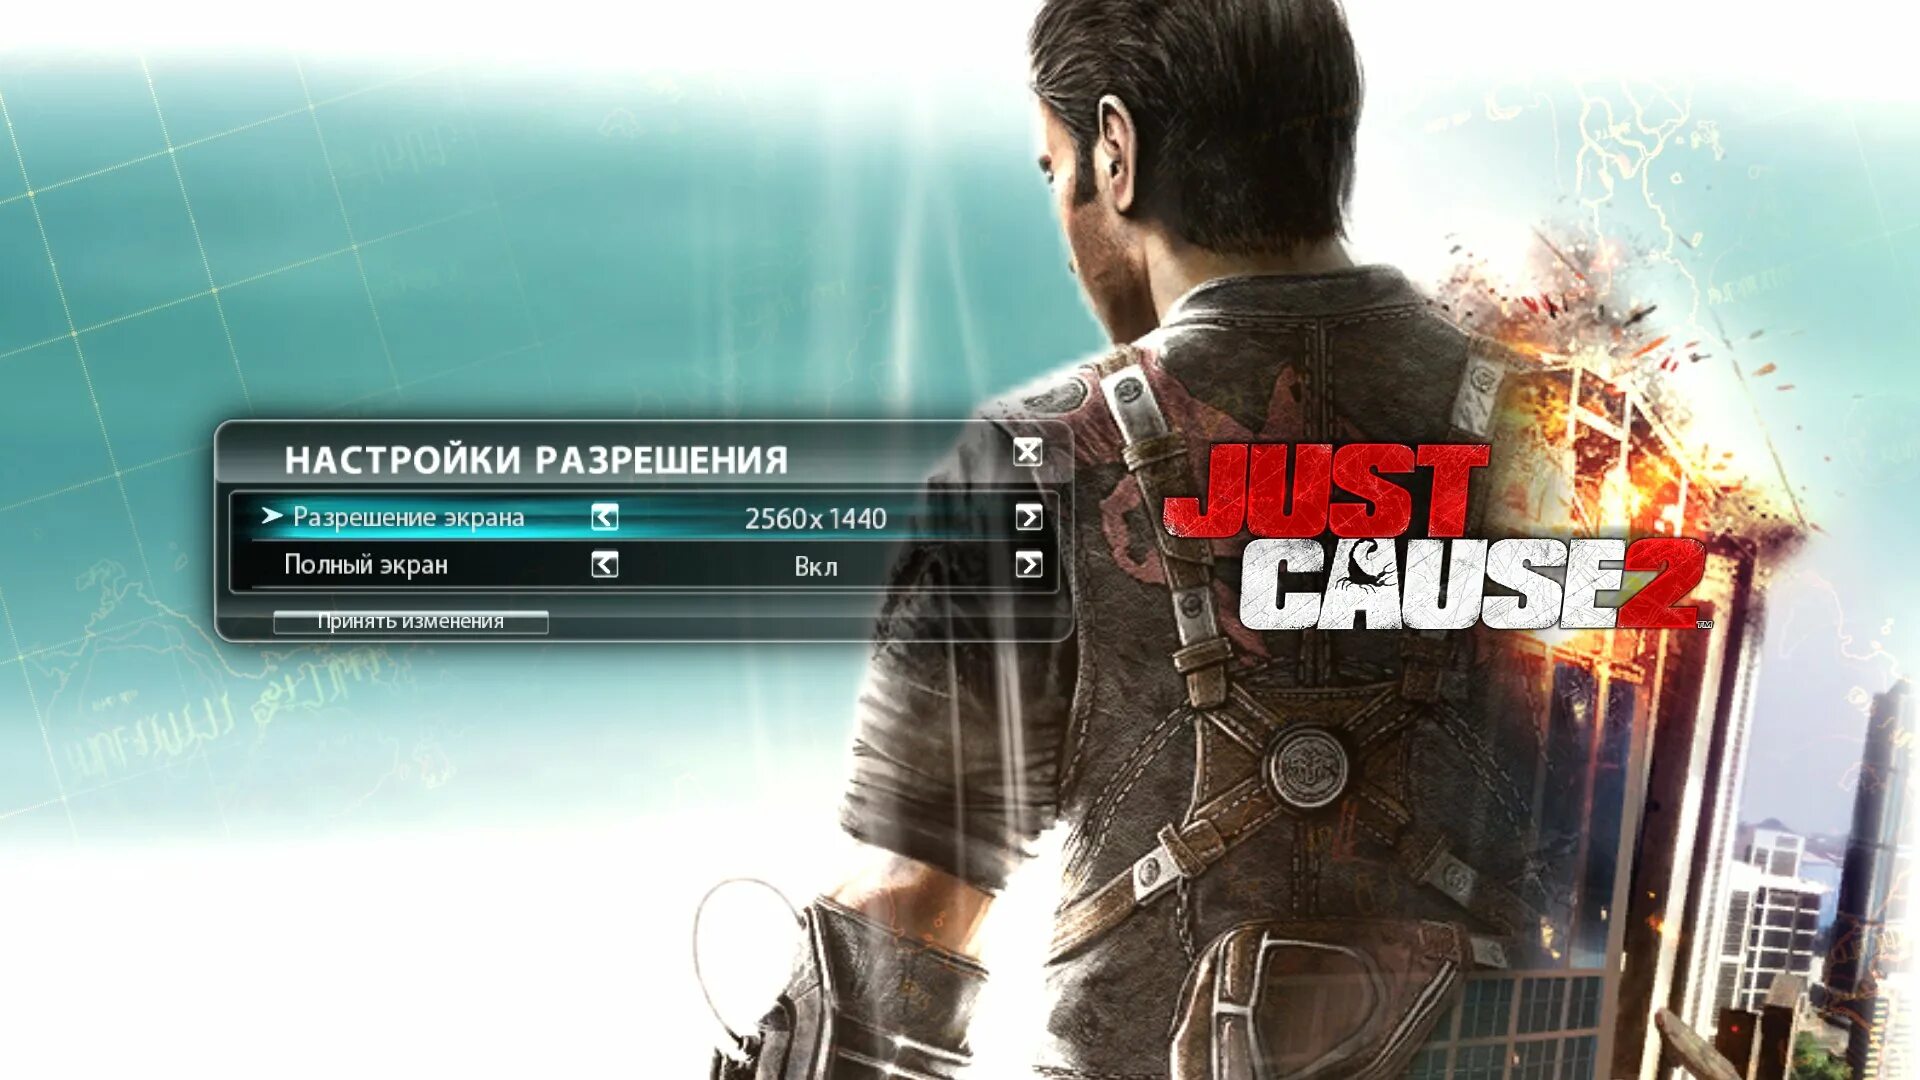 Just one game. Just cause 2 Xbox 360 диск. Just cause 1 диск. Just cause 2 диск. Разрешение экрана в играх.